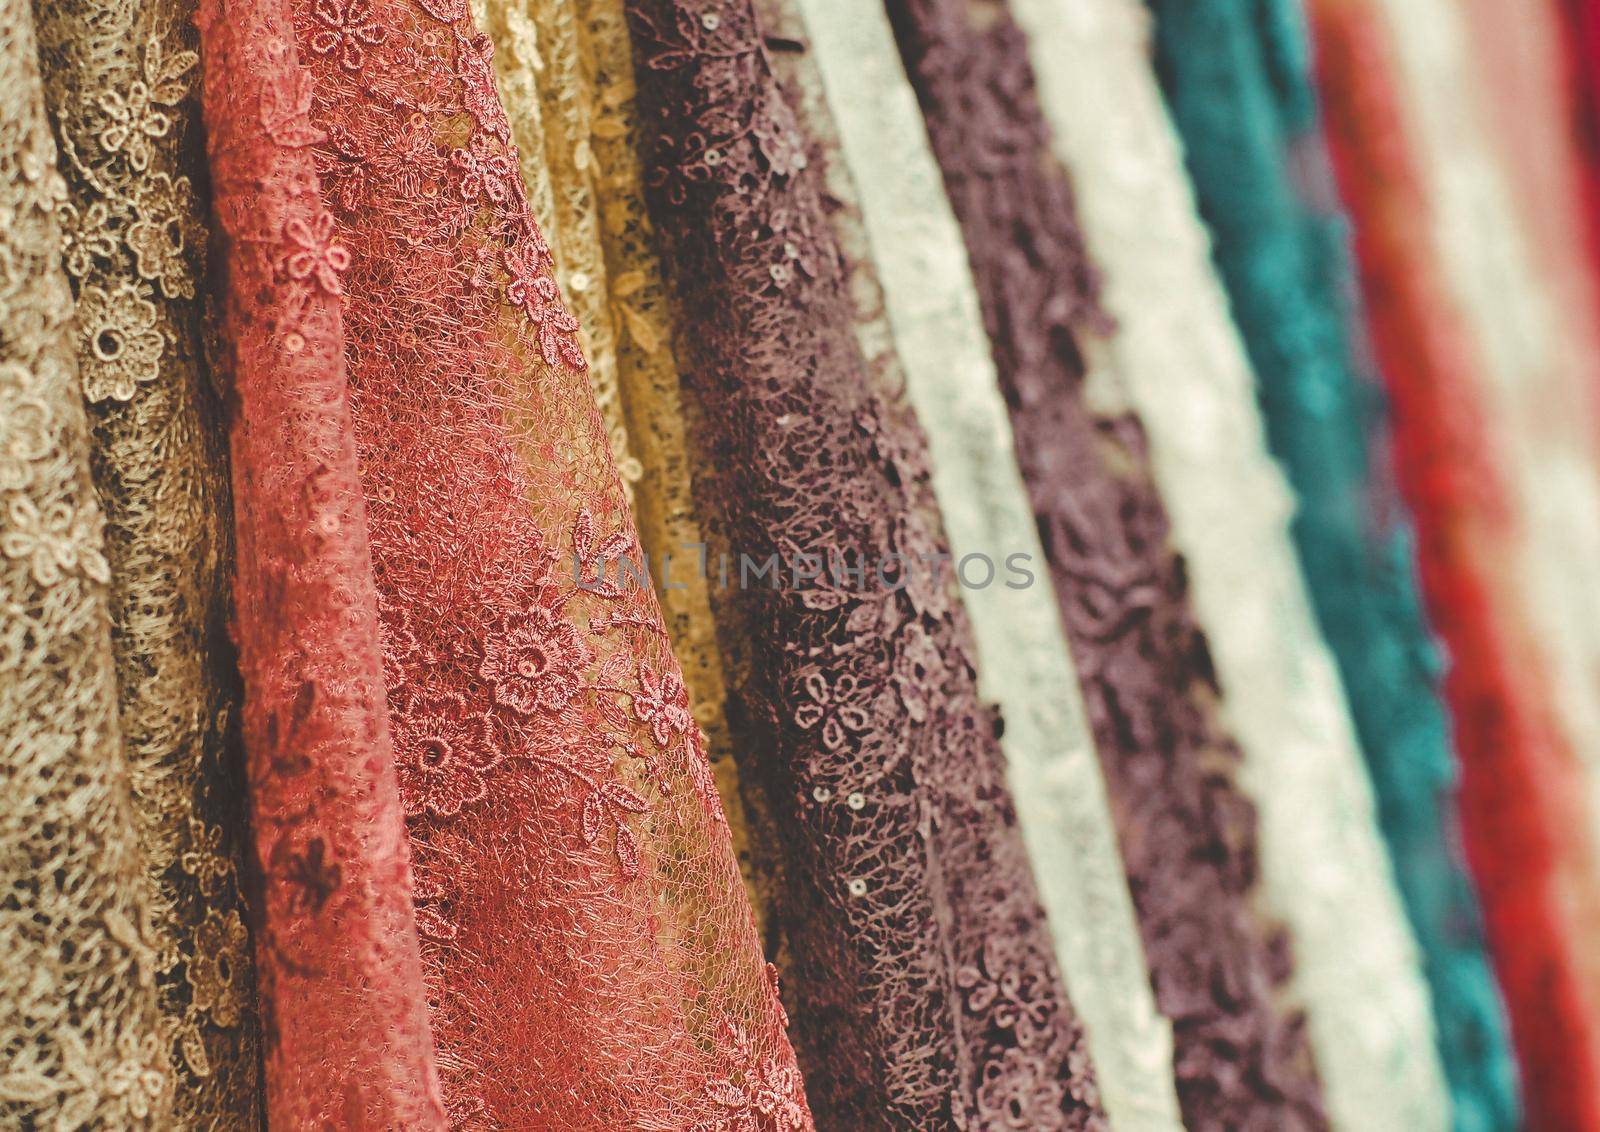 colorful  lace fabric  rolls incolorful lace cloth fabric rolls in textile shop industry textile shop industry by Petrichor